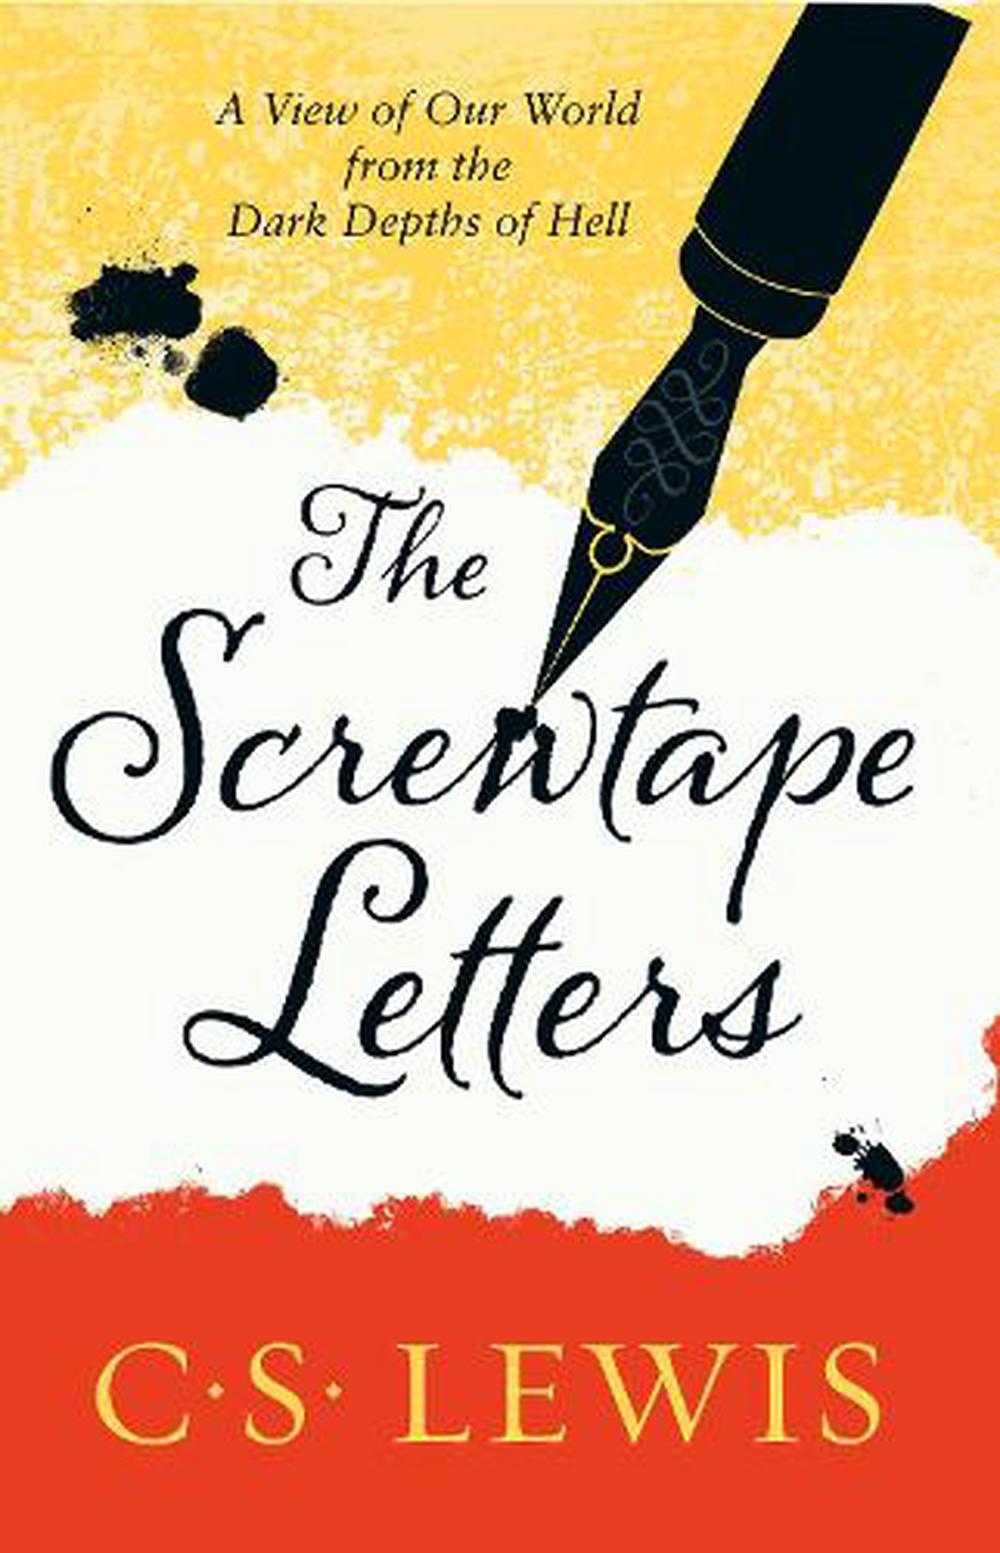 the screwtape letters book